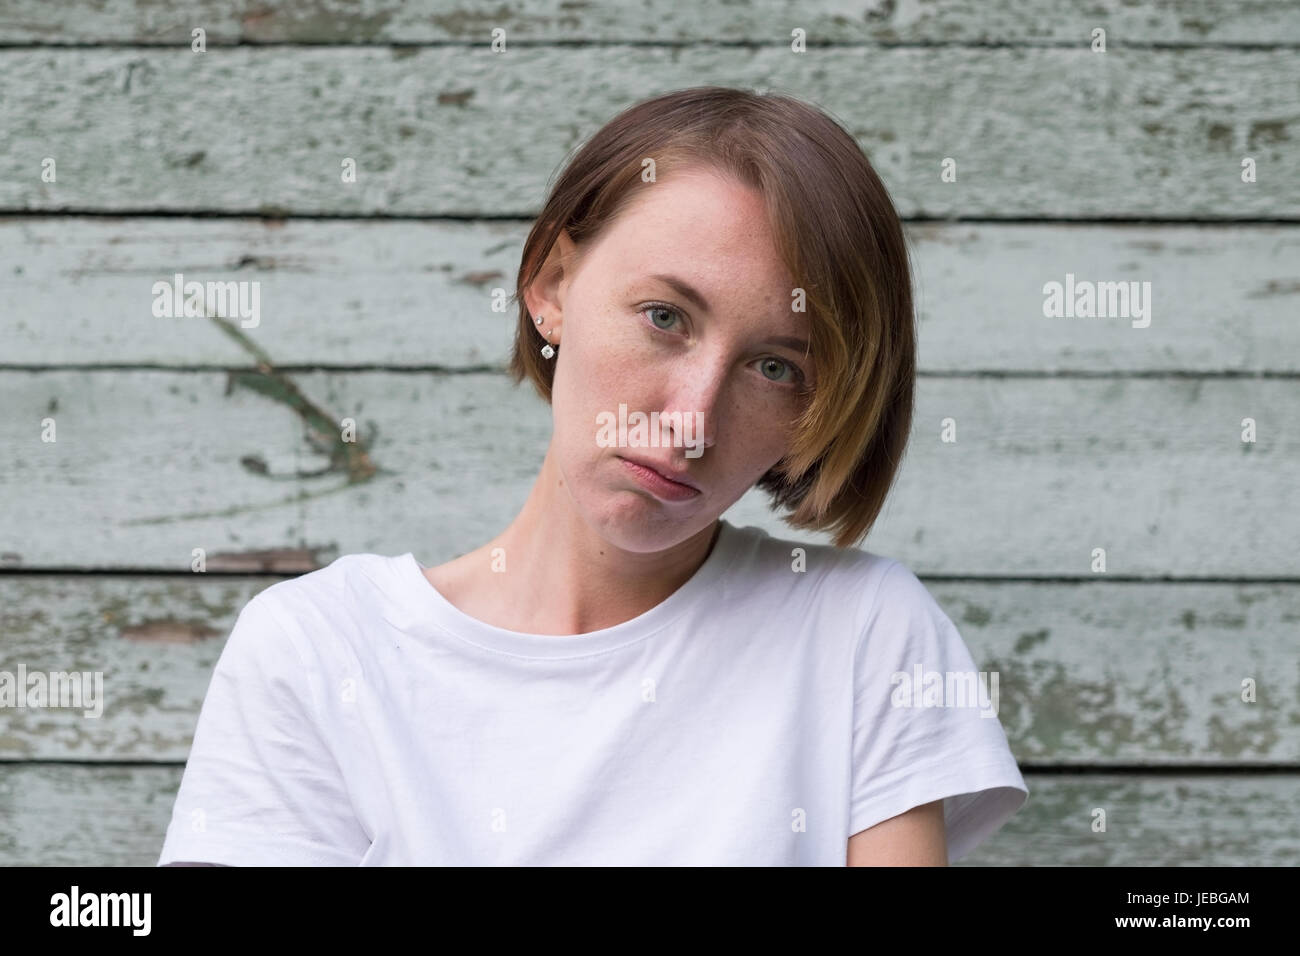 portrait of beautiful young angry woman in white t-shirt Stock Photo